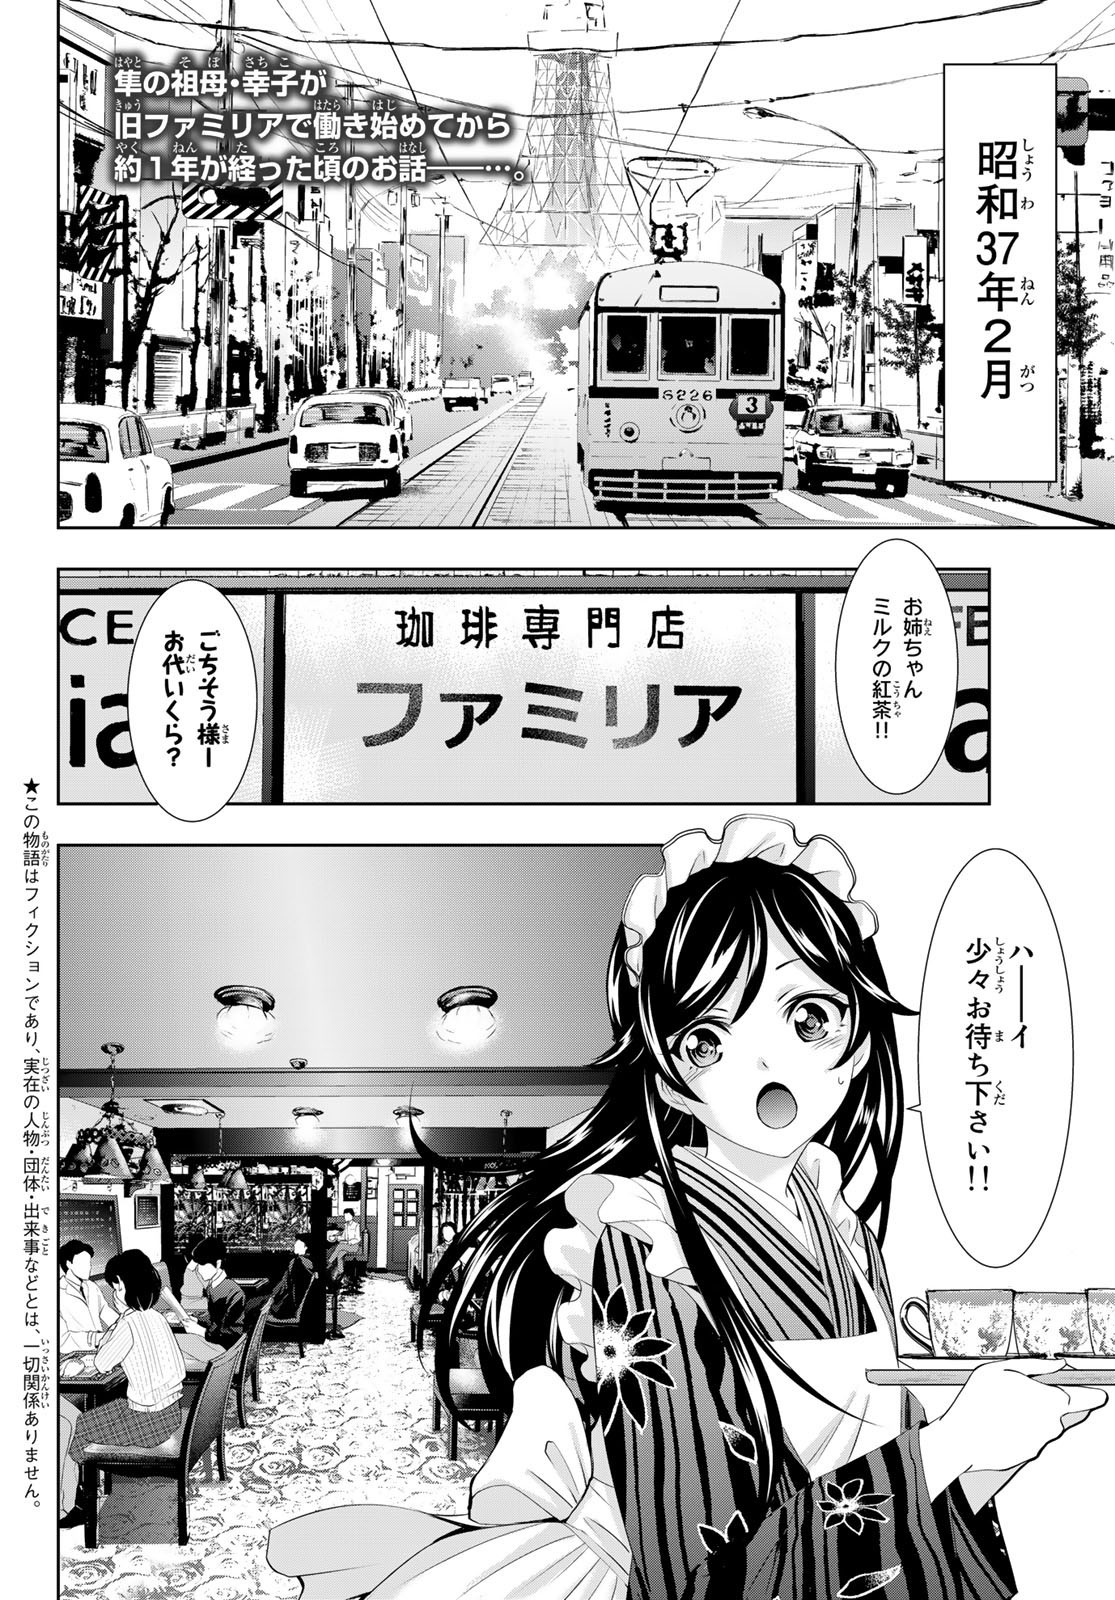 Goddess-Cafe-Terrace - Chapter 094 - Page 2